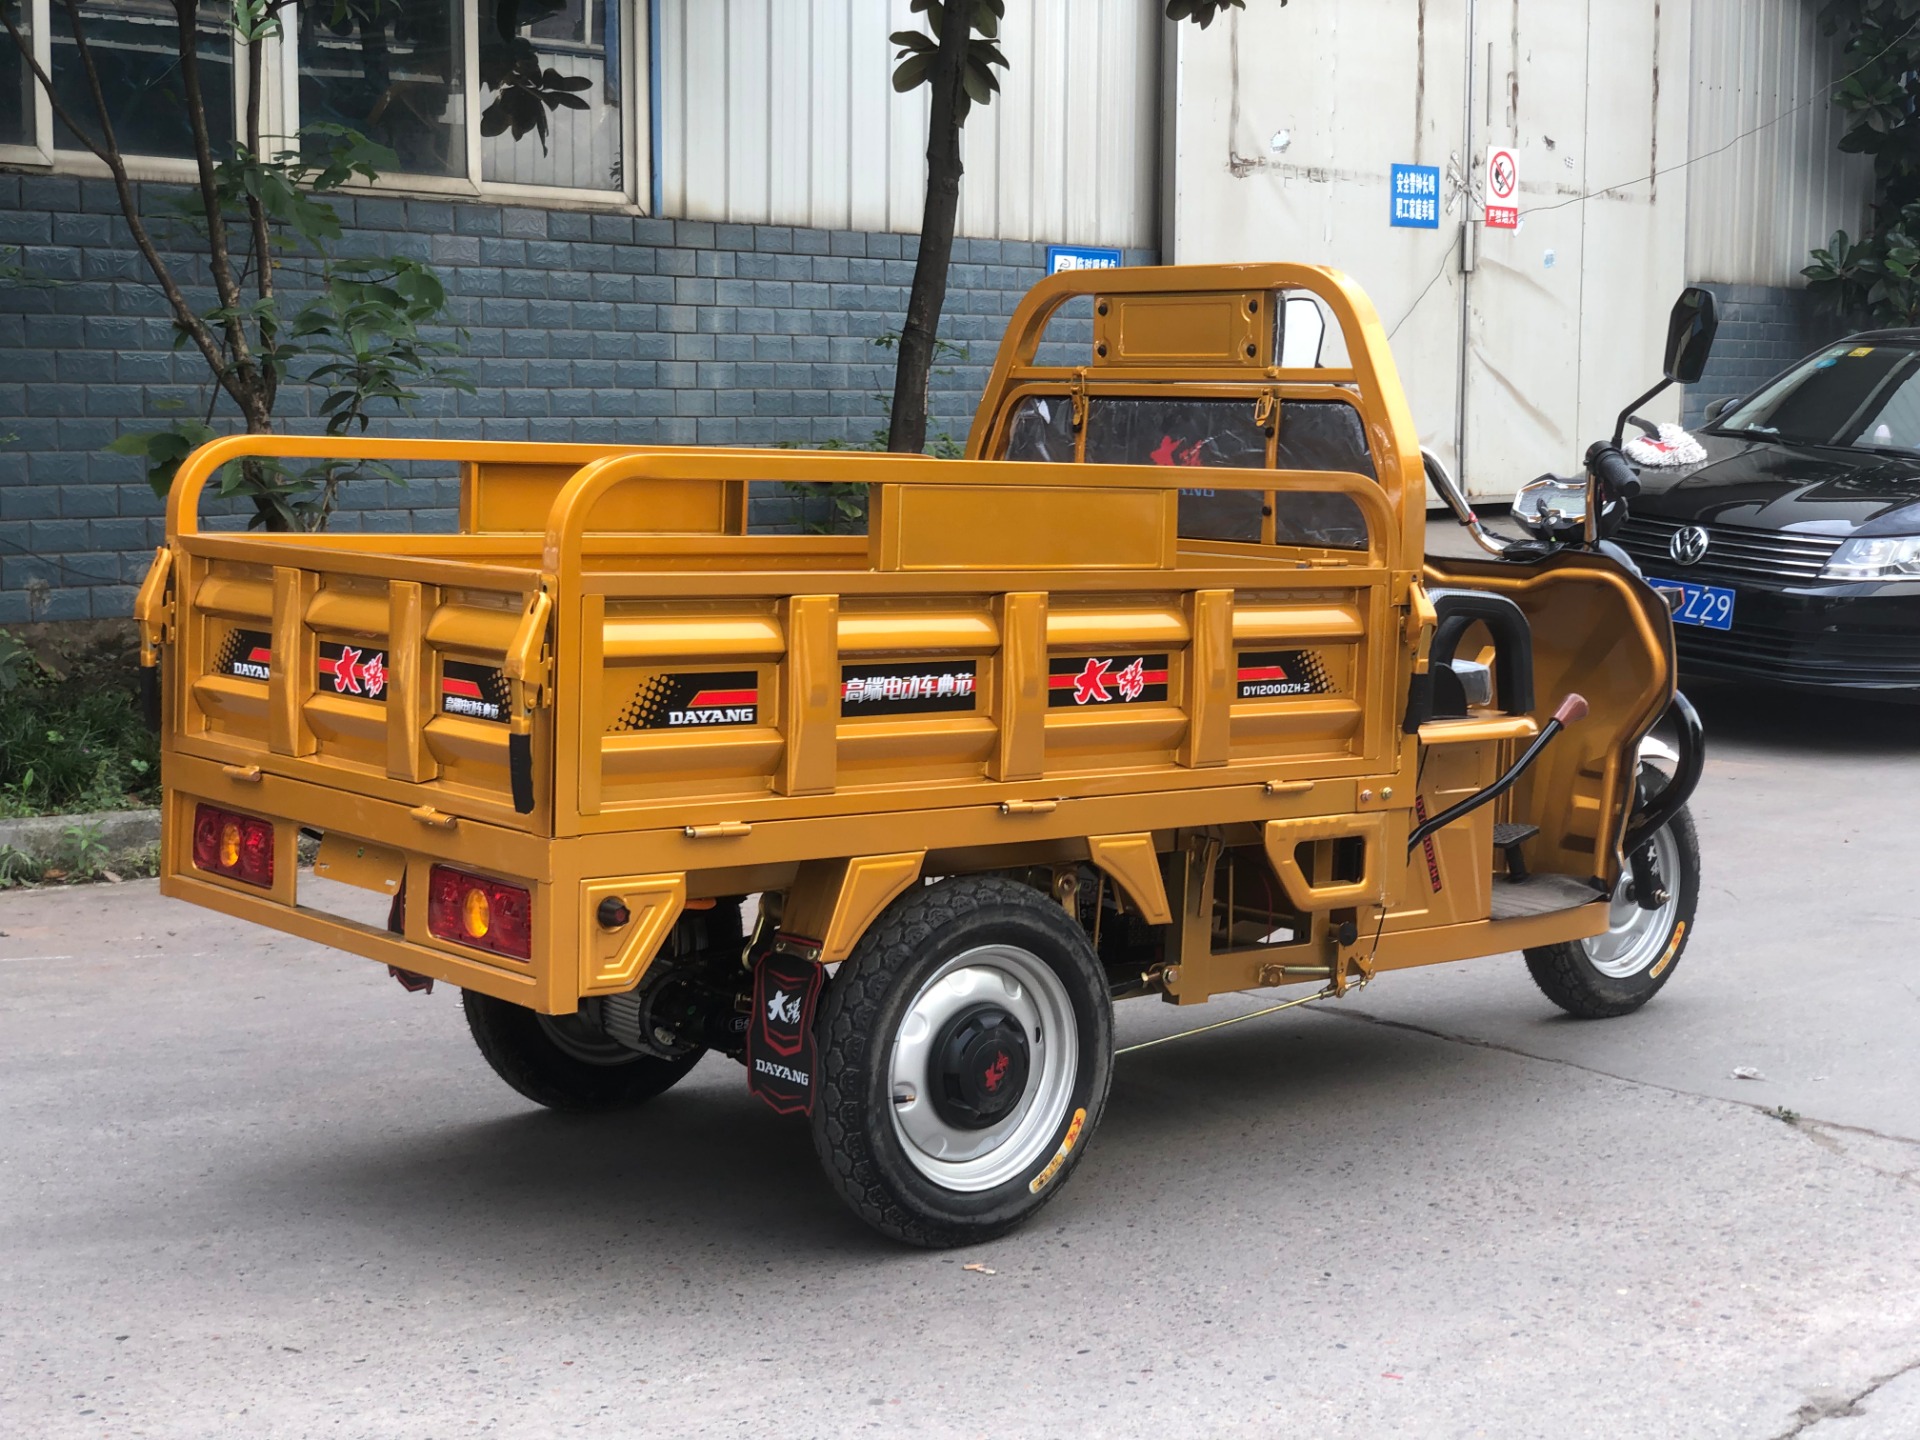 DY-E1 electric cargo tricycle over 1000KW